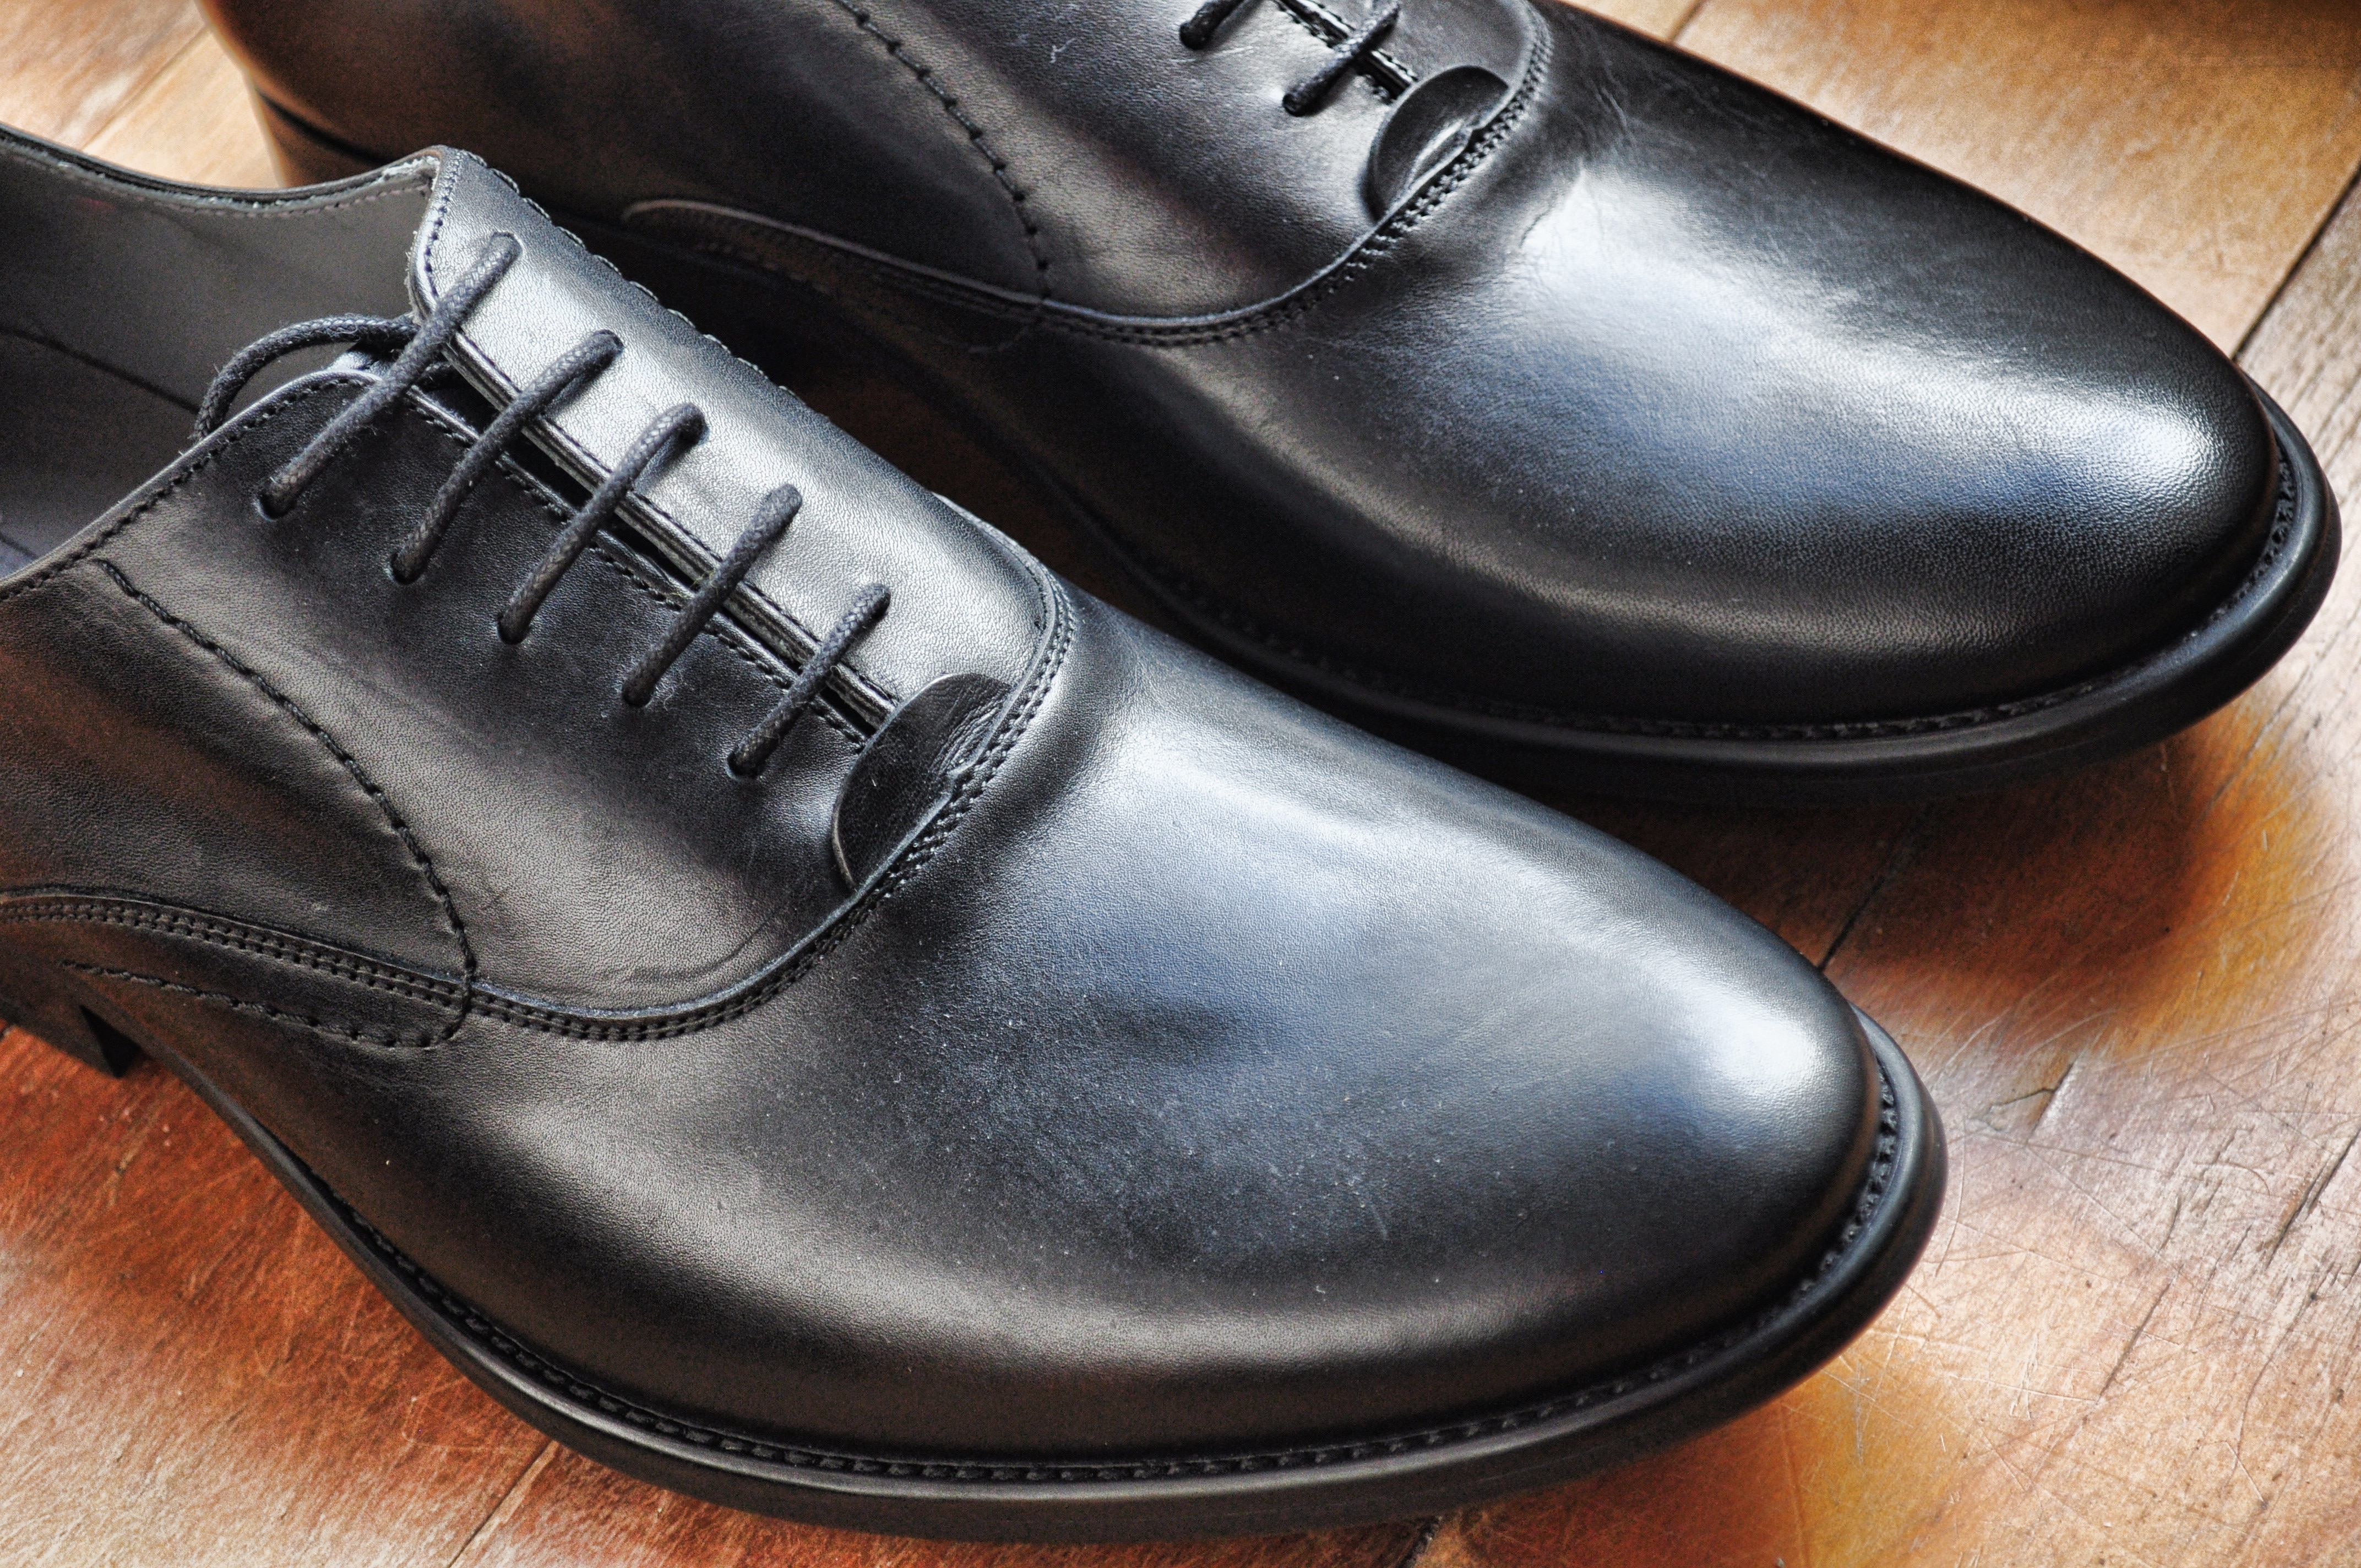 pair of black leather dress shoes